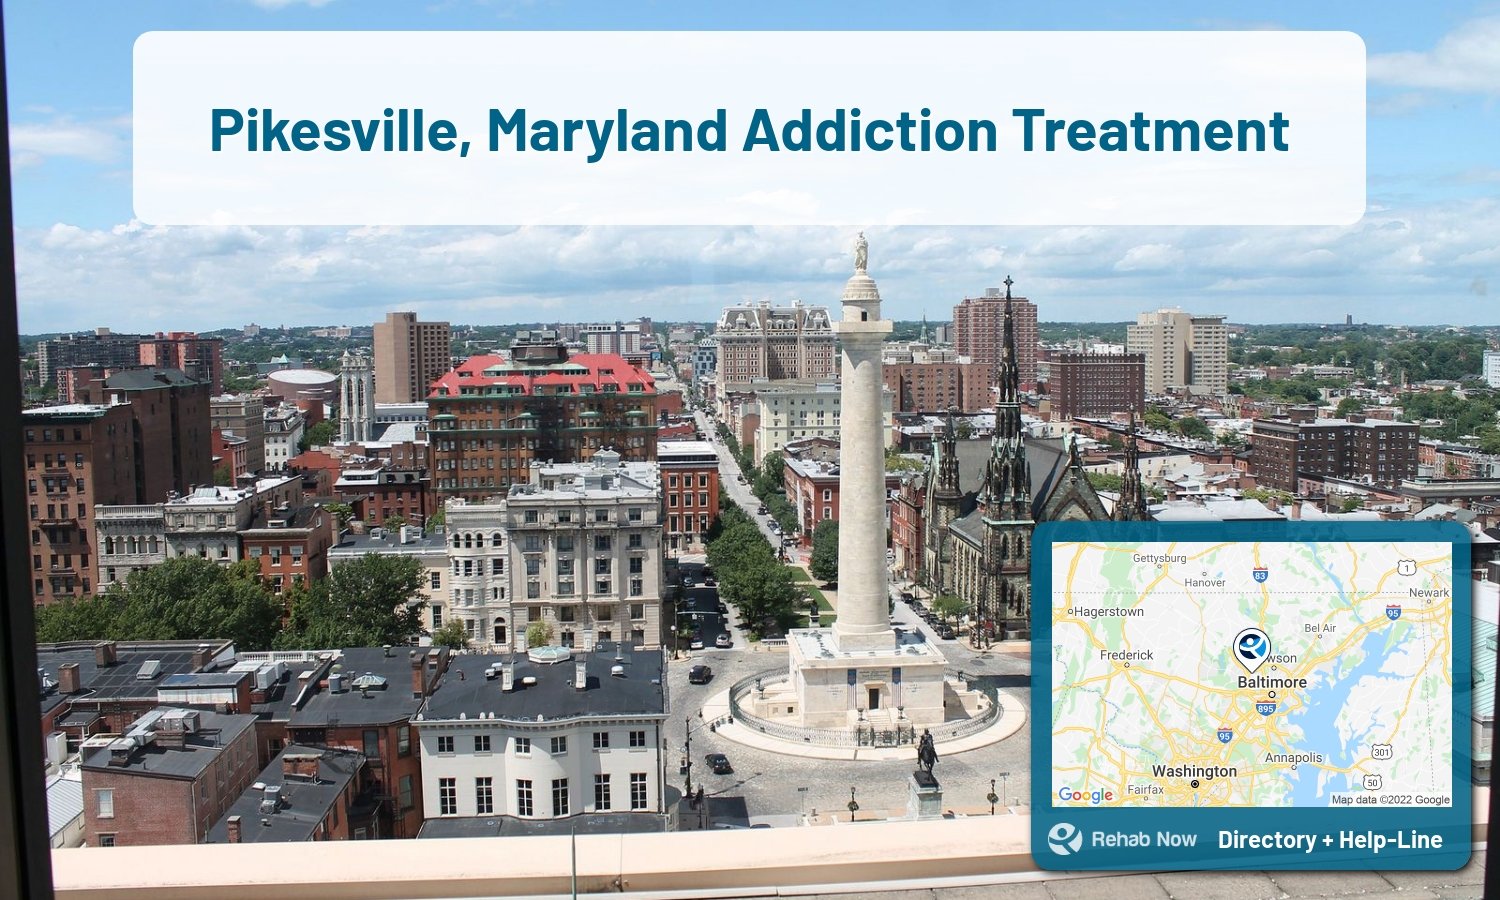 Pikesville, MD Treatment Centers. Find drug rehab in Pikesville, Maryland, or detox and treatment programs. Get the right help now!